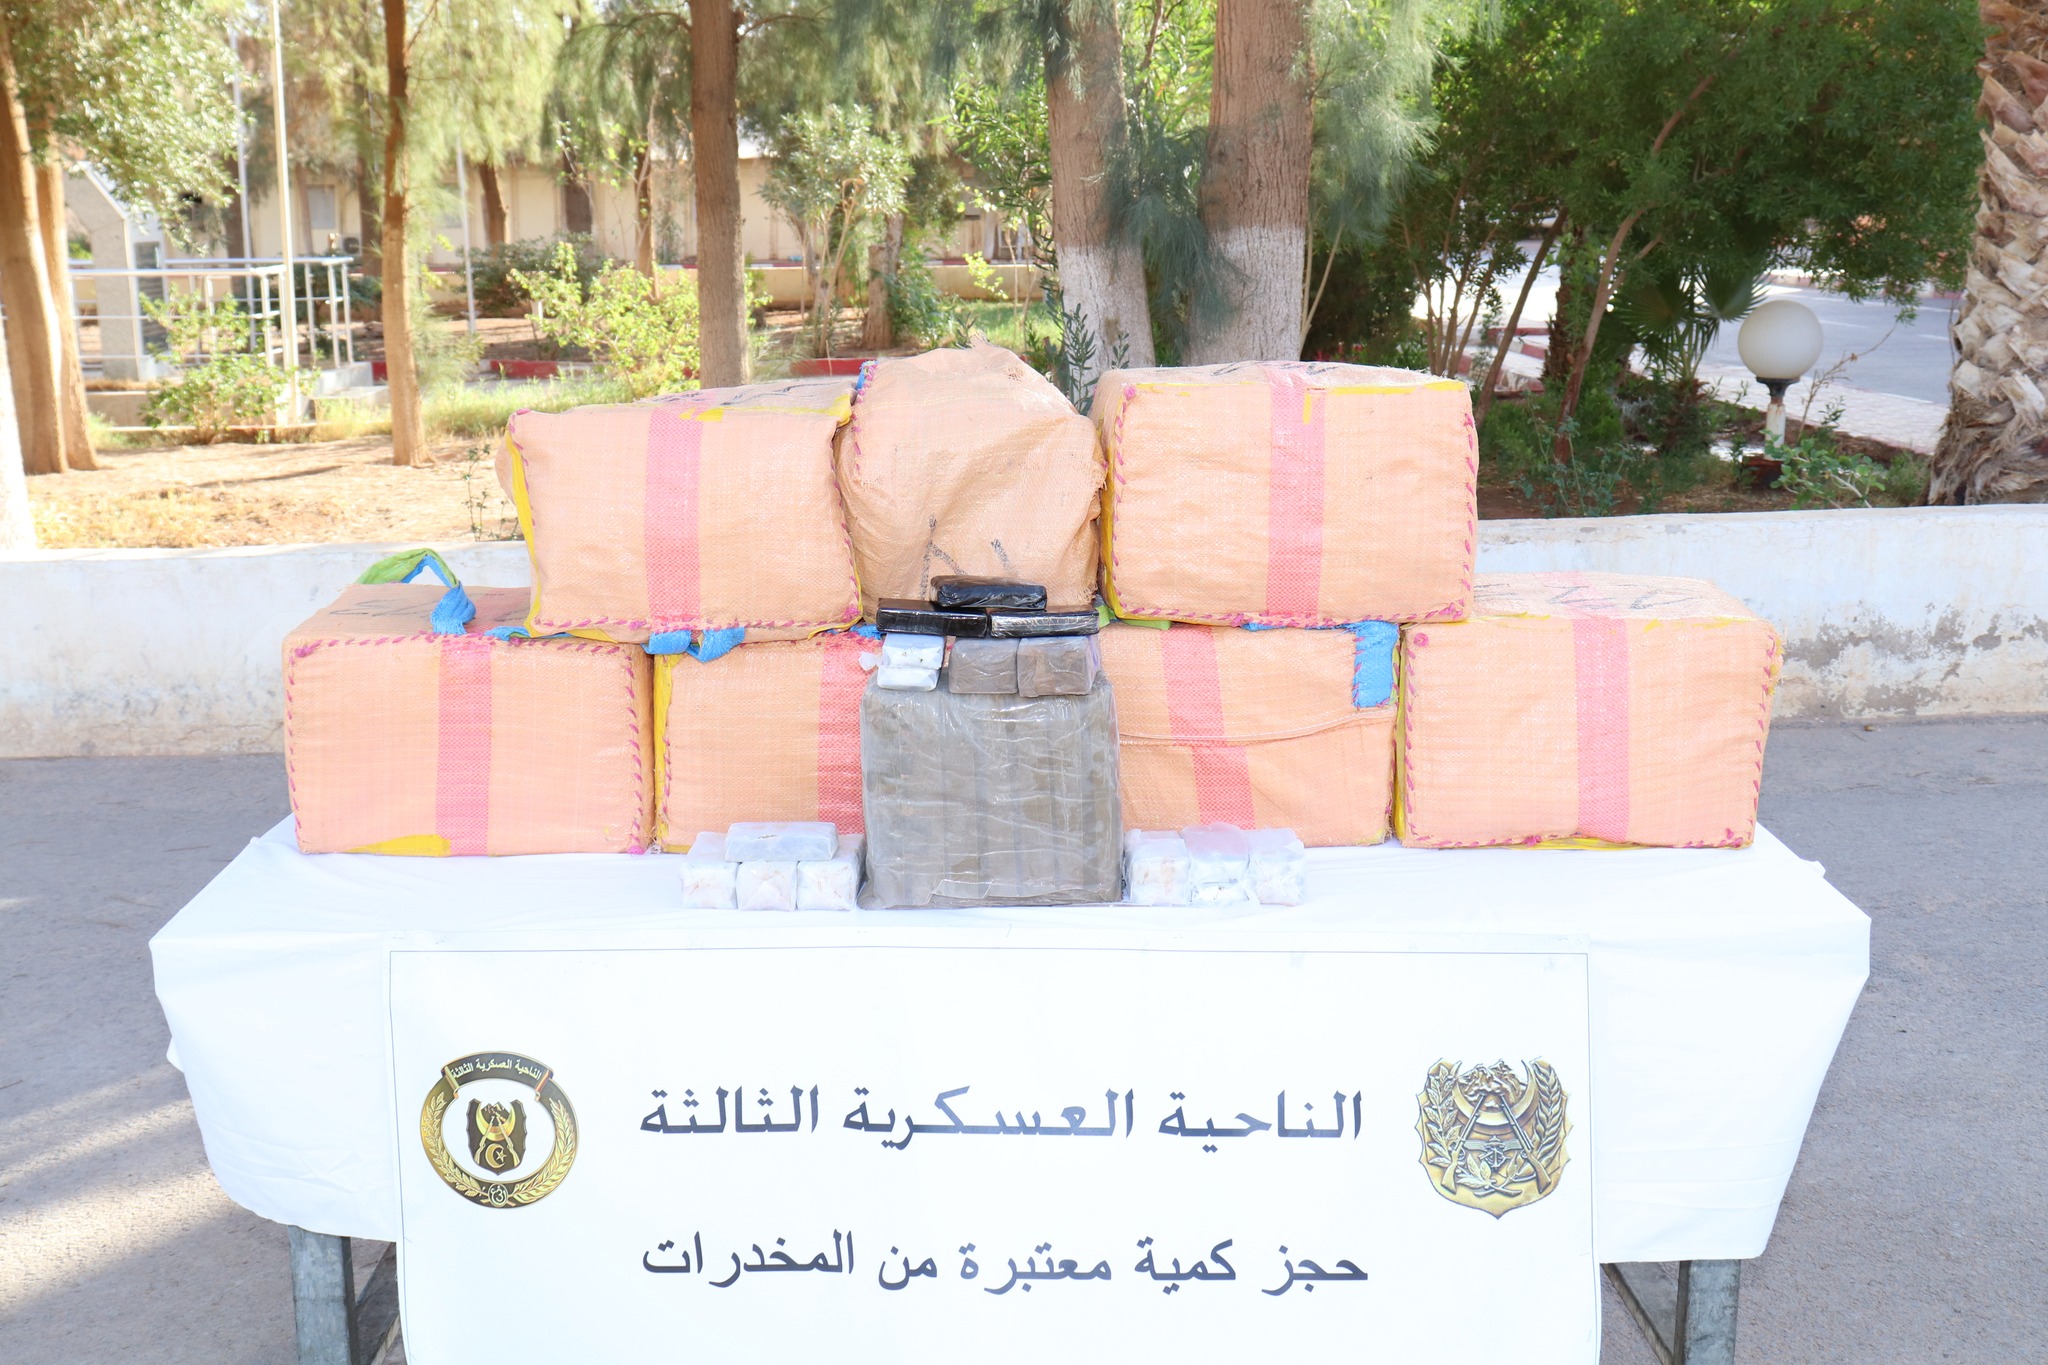 Toll: 5 members of support for terrorist groups arrested and quantities of Moroccan kif seized - Algerian Dialogue